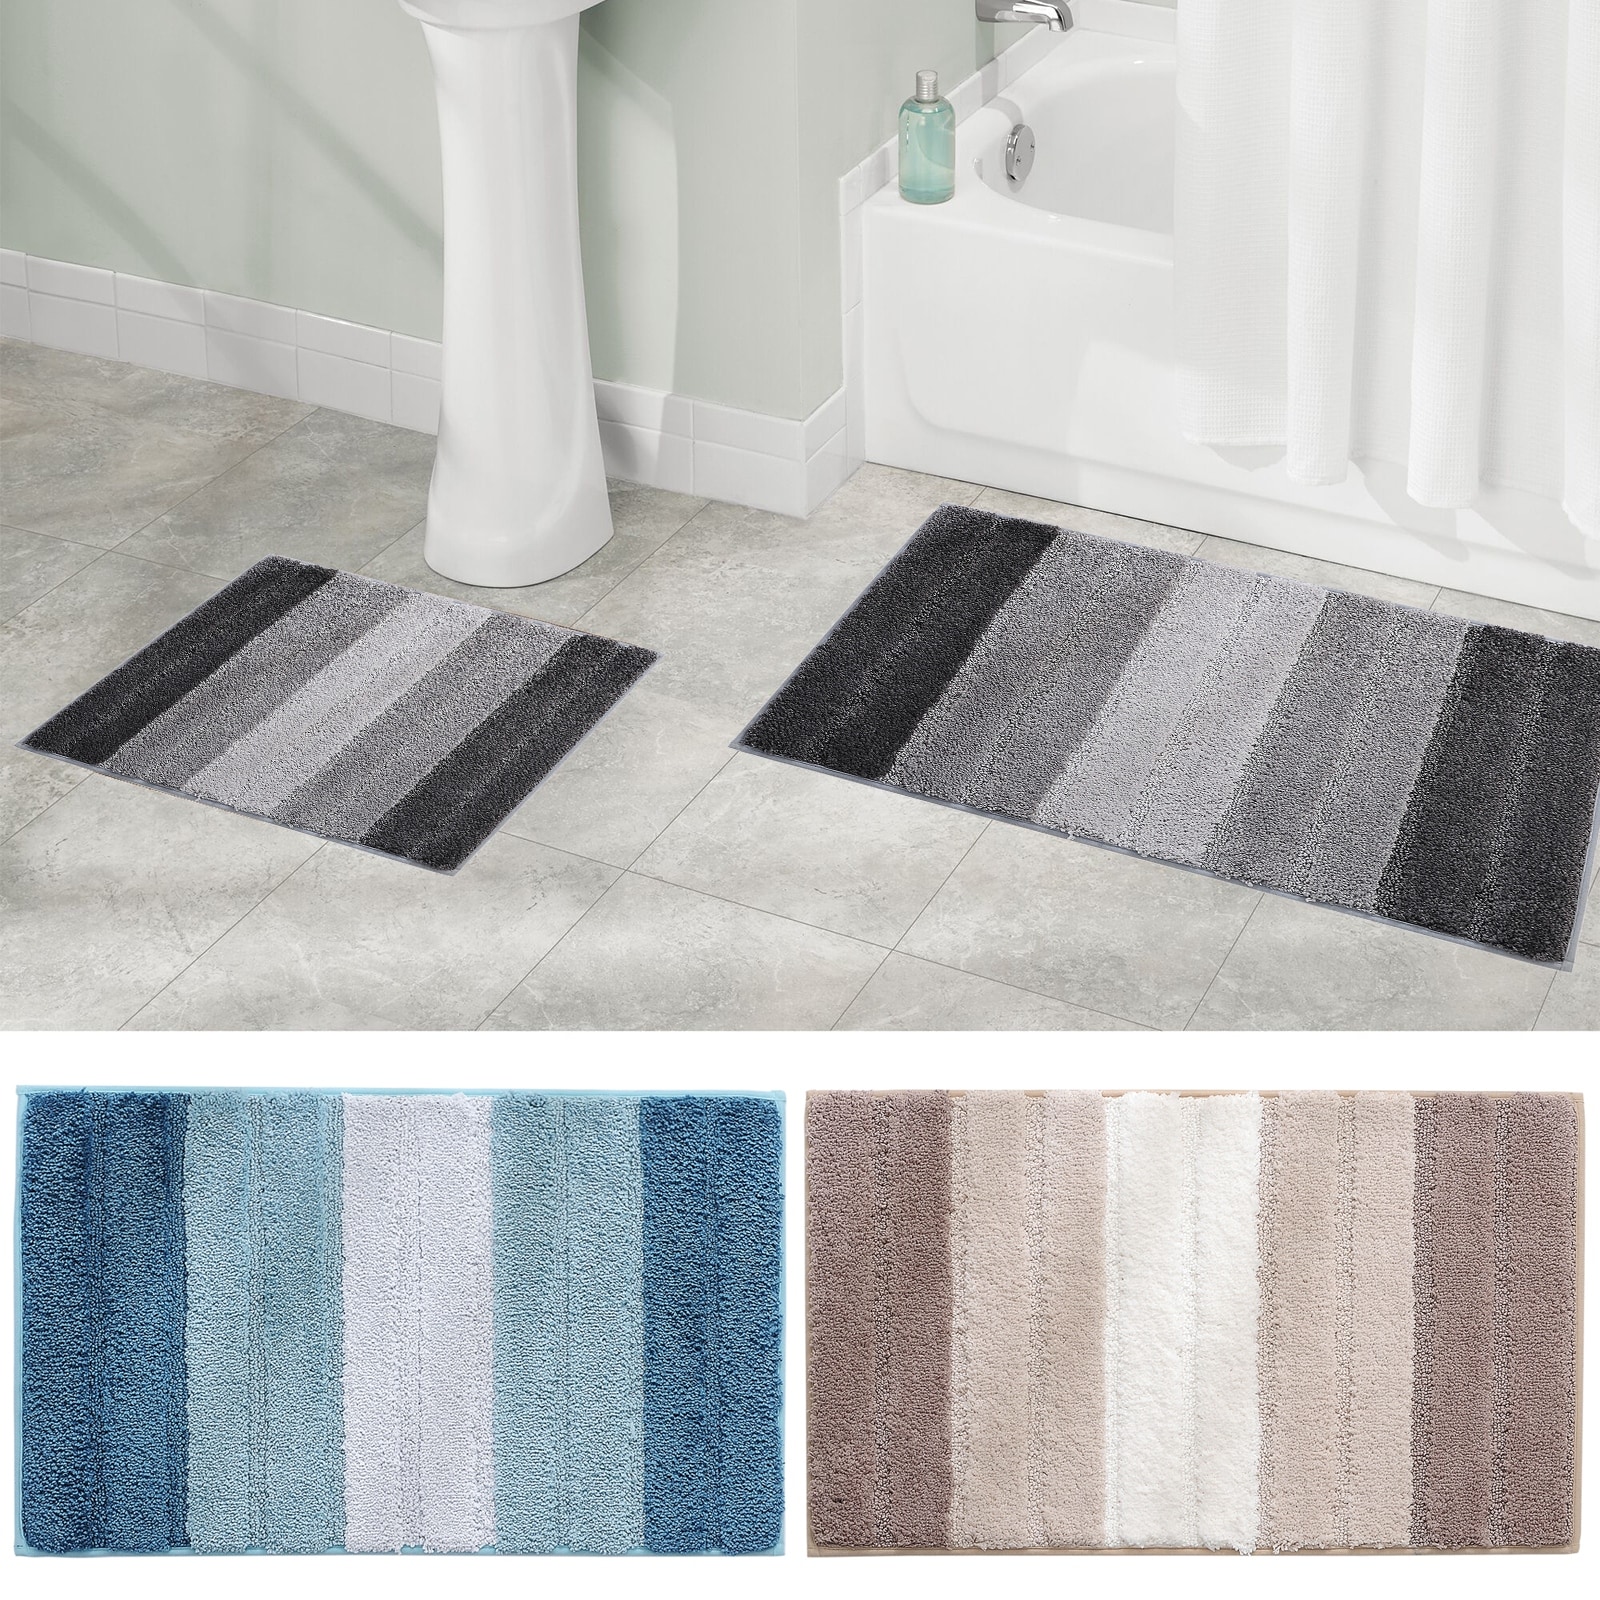 https://ak1.ostkcdn.com/images/products/is/images/direct/2ca2ab4f6f411f4be0883441cd82a64f7f488013/Striped-Bath-Rugs-Bathroom-Mat-Water-Absorbent-Non-Slip-Backing-Pads.jpg